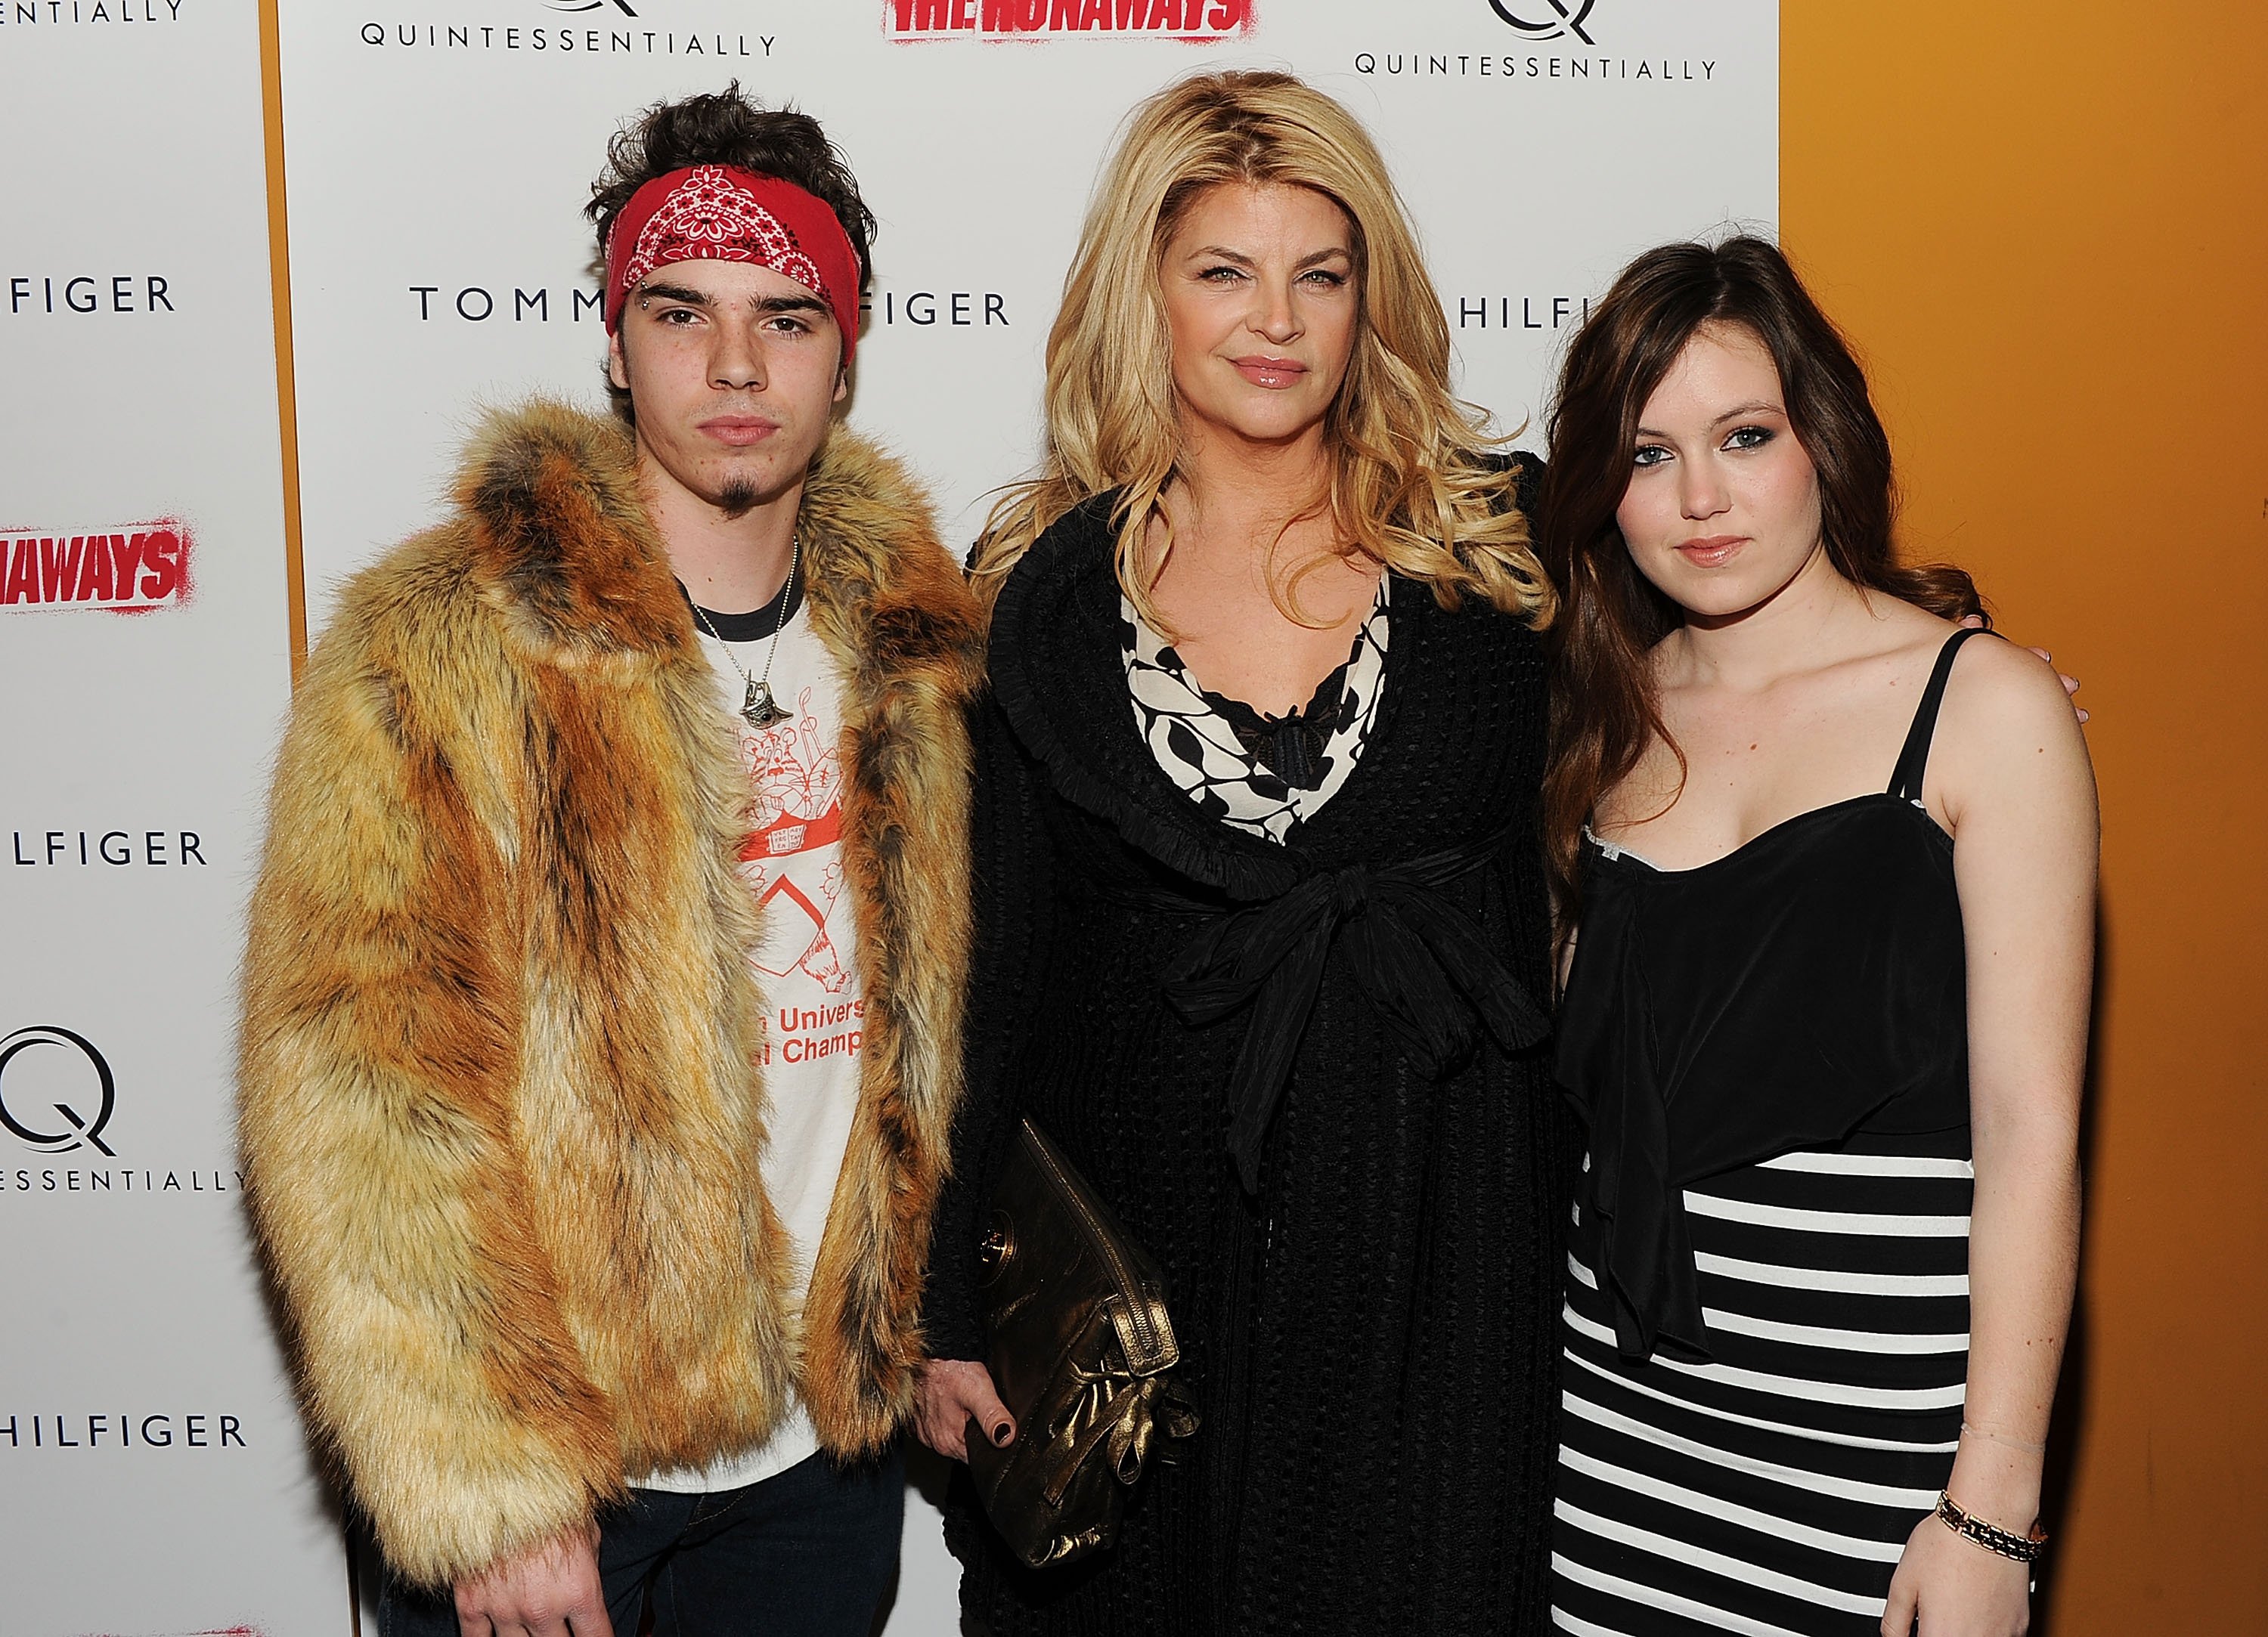 True Stevenson pictured with his mom Kirstie Alley and sister Lillie Stevenson at the "The Runaways" New York premiere at Landmark Sunshine Cinema on March 17, 2010 in New York City | Source: Getty Images